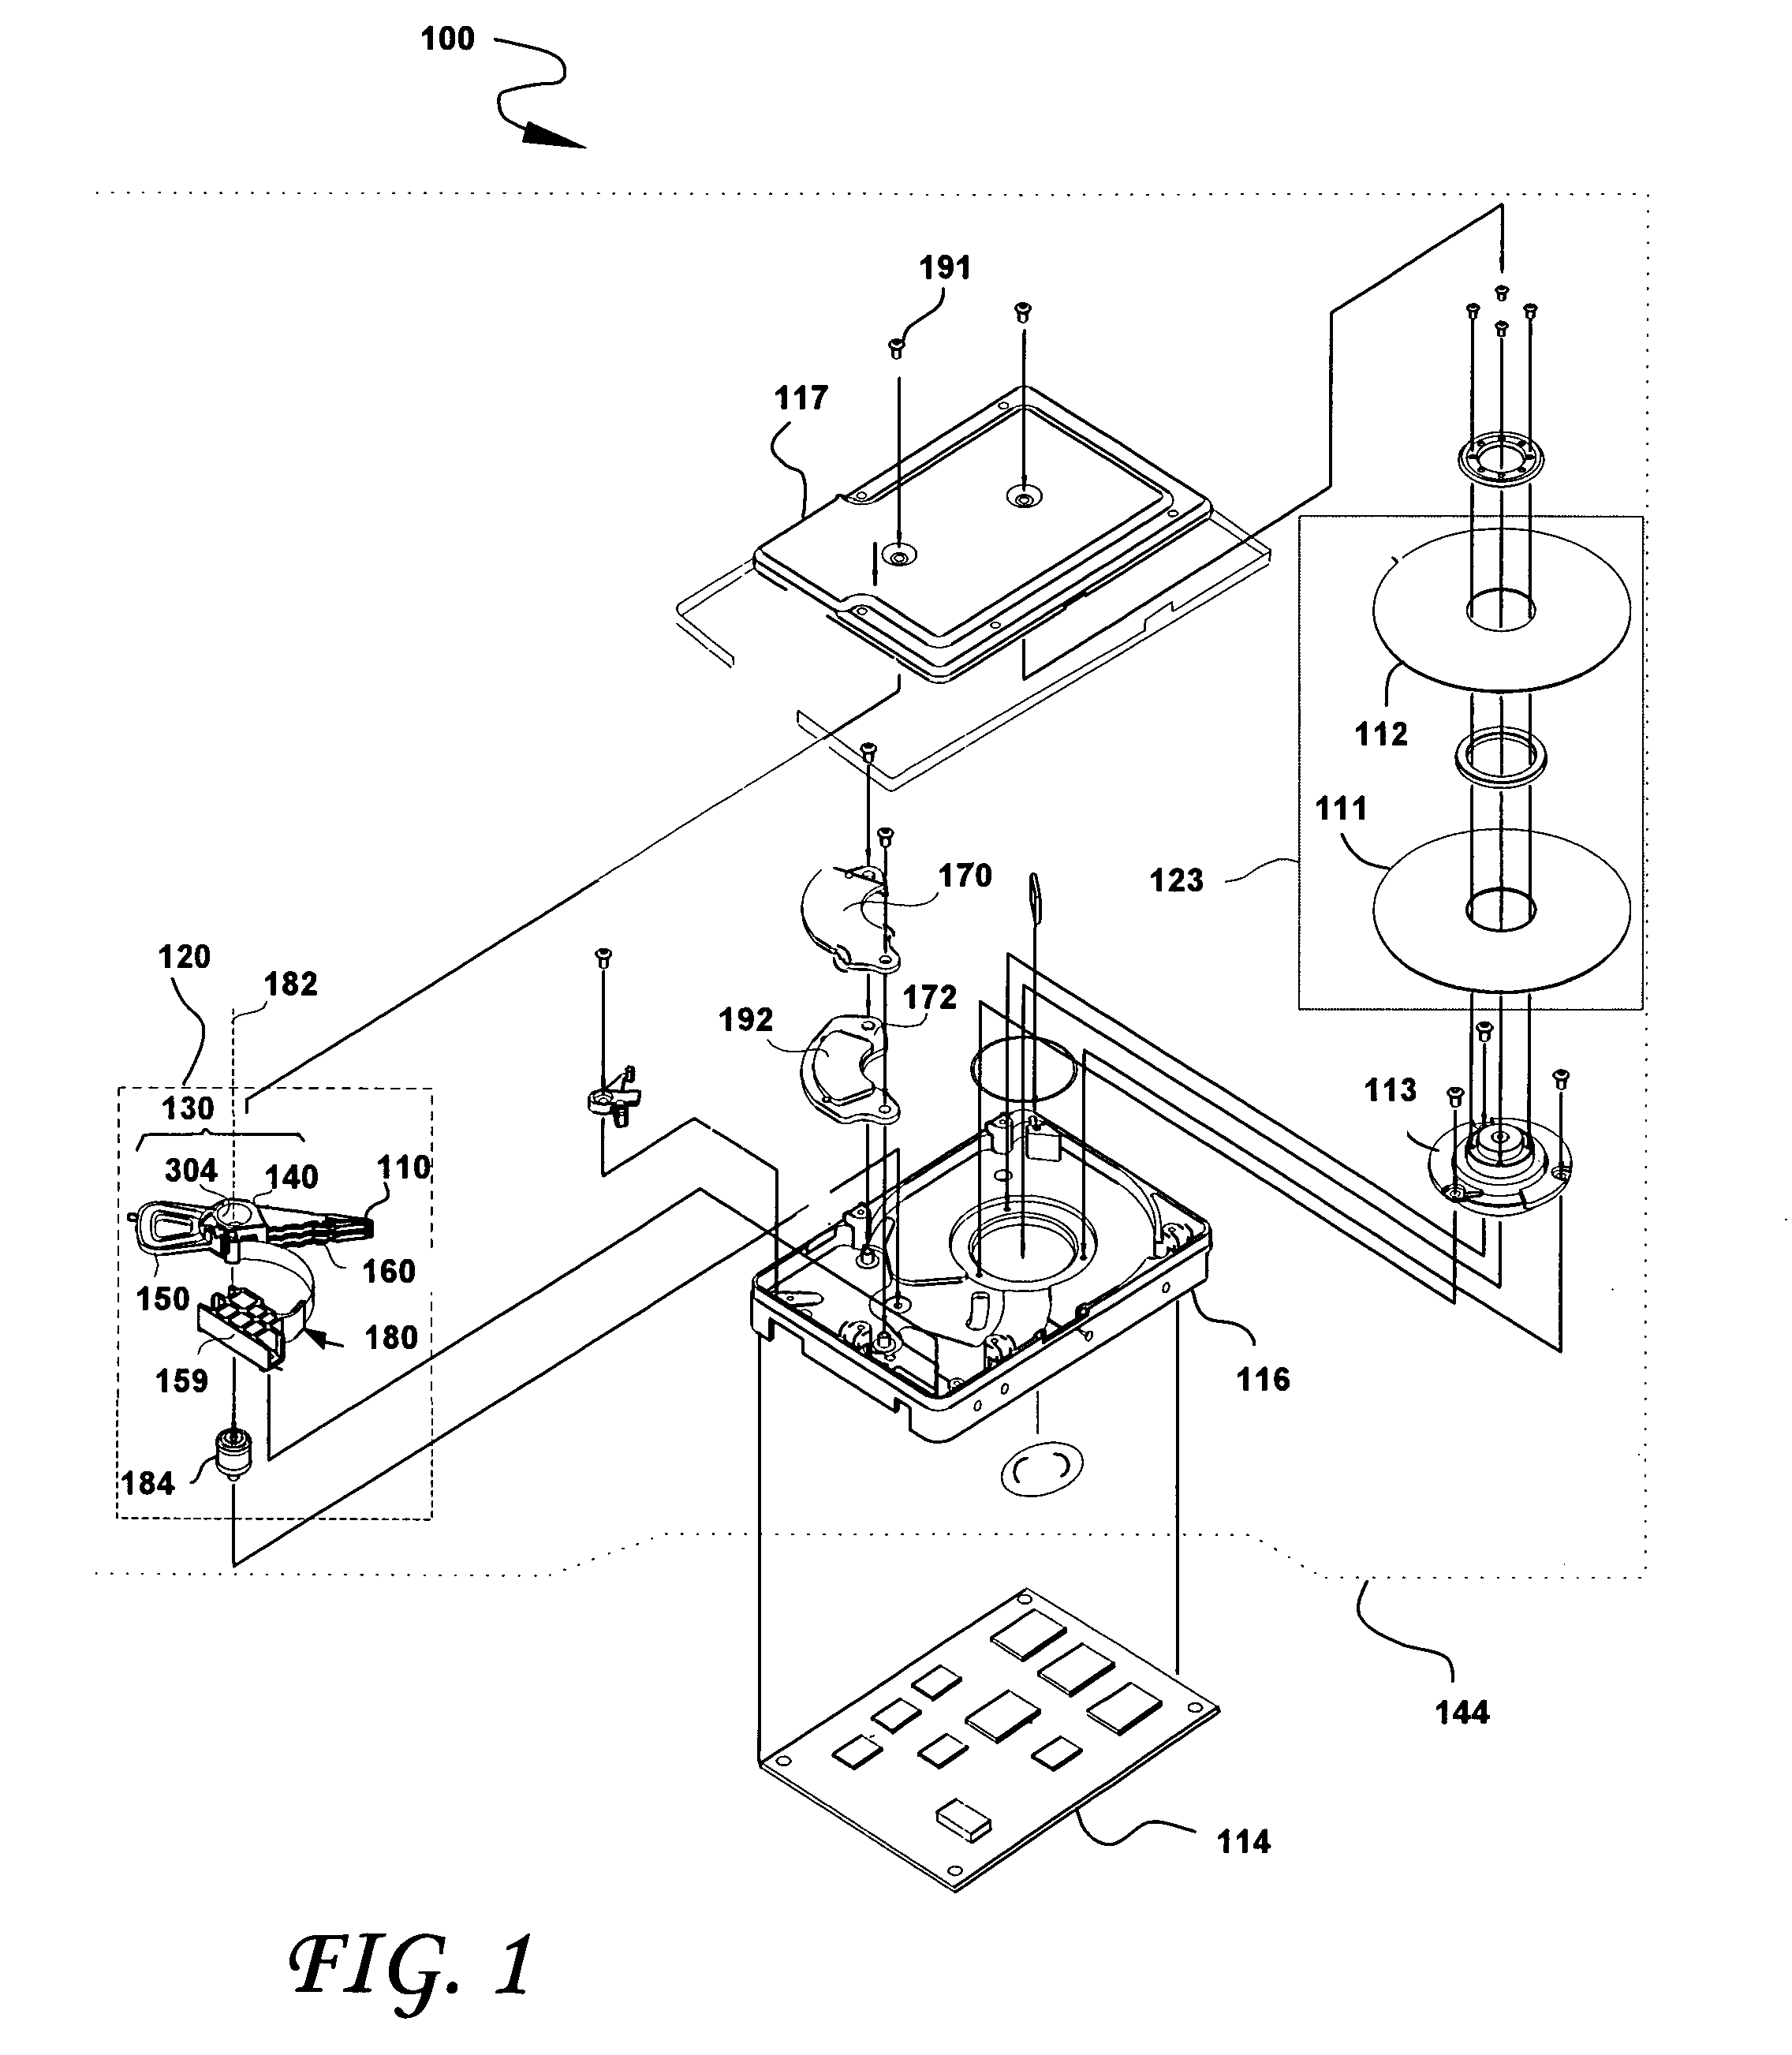 Disk drive actuator arm assembly having one or more slotted actuator arms